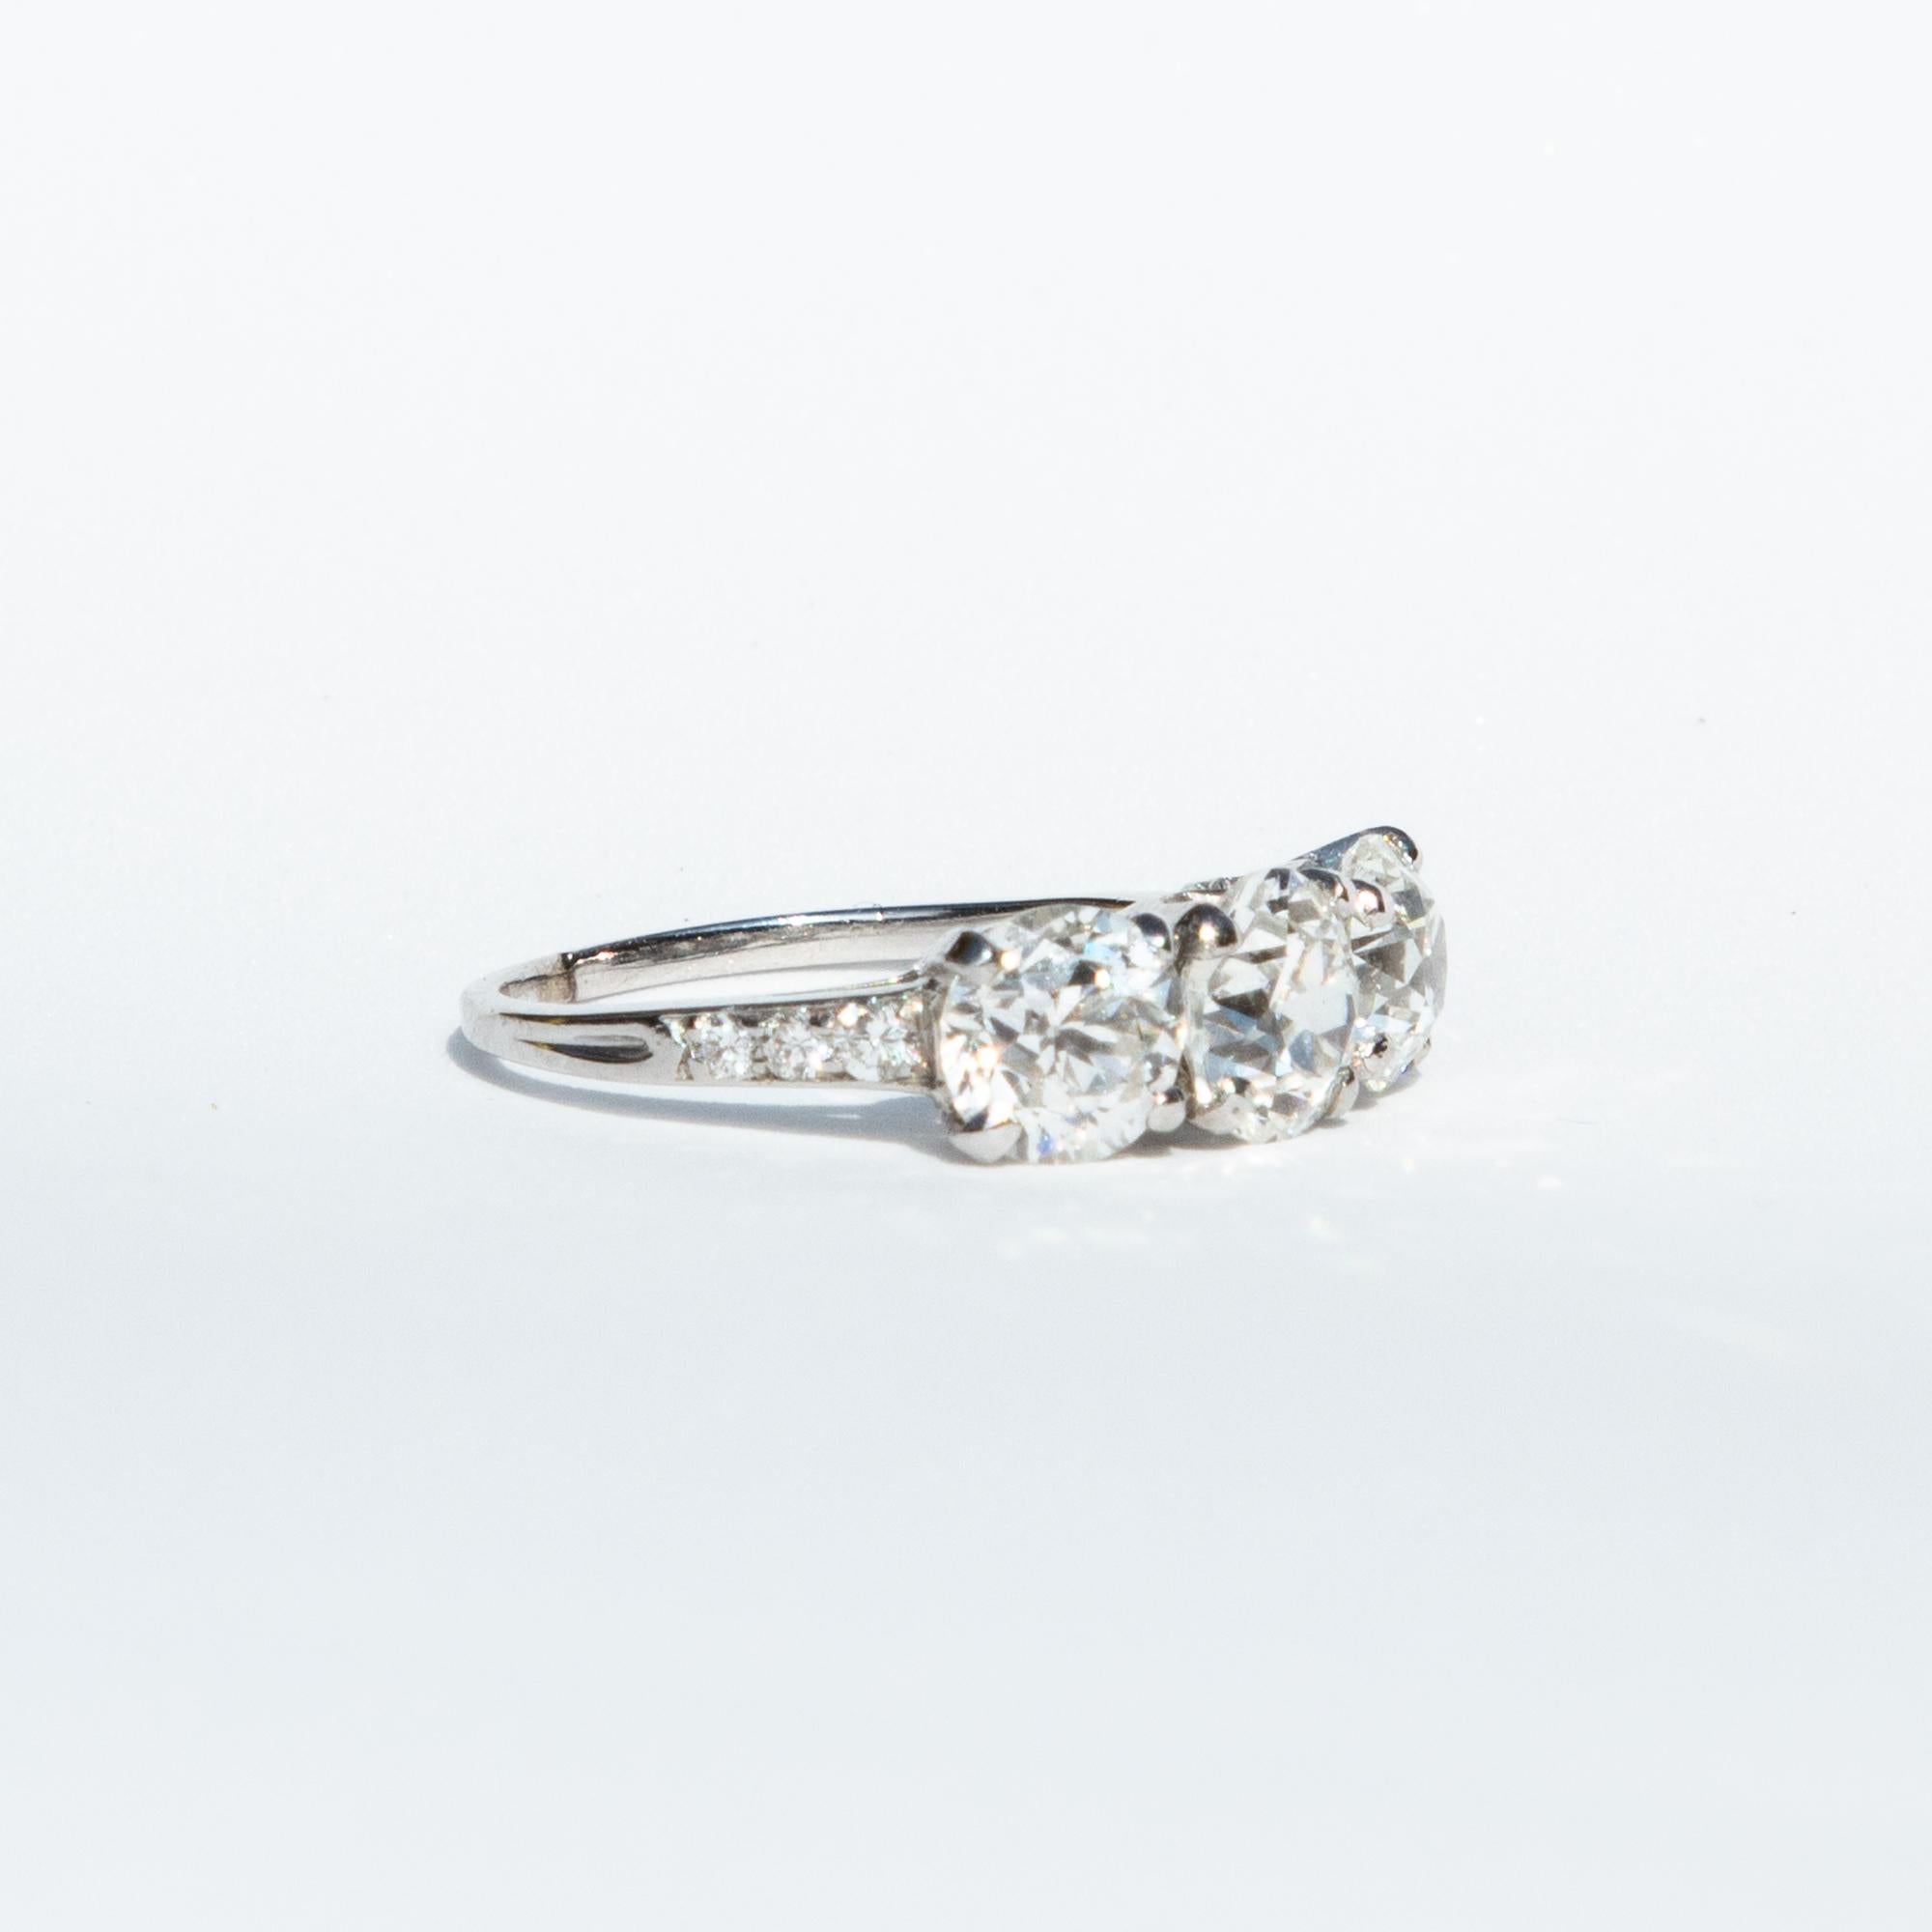 A incredible three-stone diamond ring crafted by the iconic Tiffany & Co. in 1925, during the height of the Art Deco era. The three principal cushion cut diamonds have a certified total weight of 3.15 carats, G/H colour ad VS1/SI1 clarity. Set in